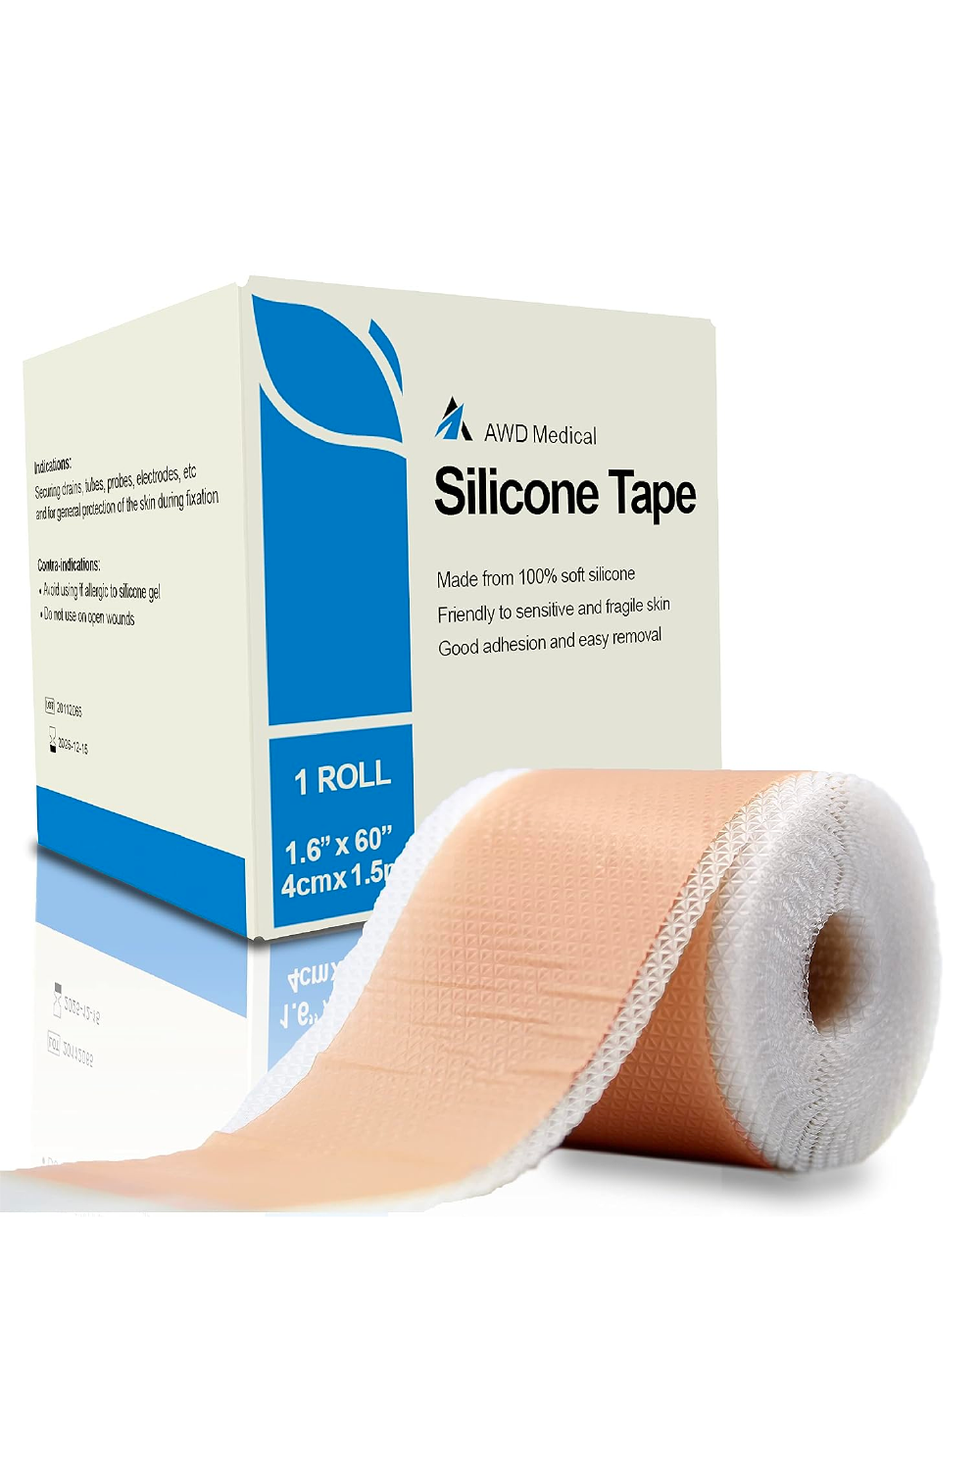 Silicone gel for treatment of scar